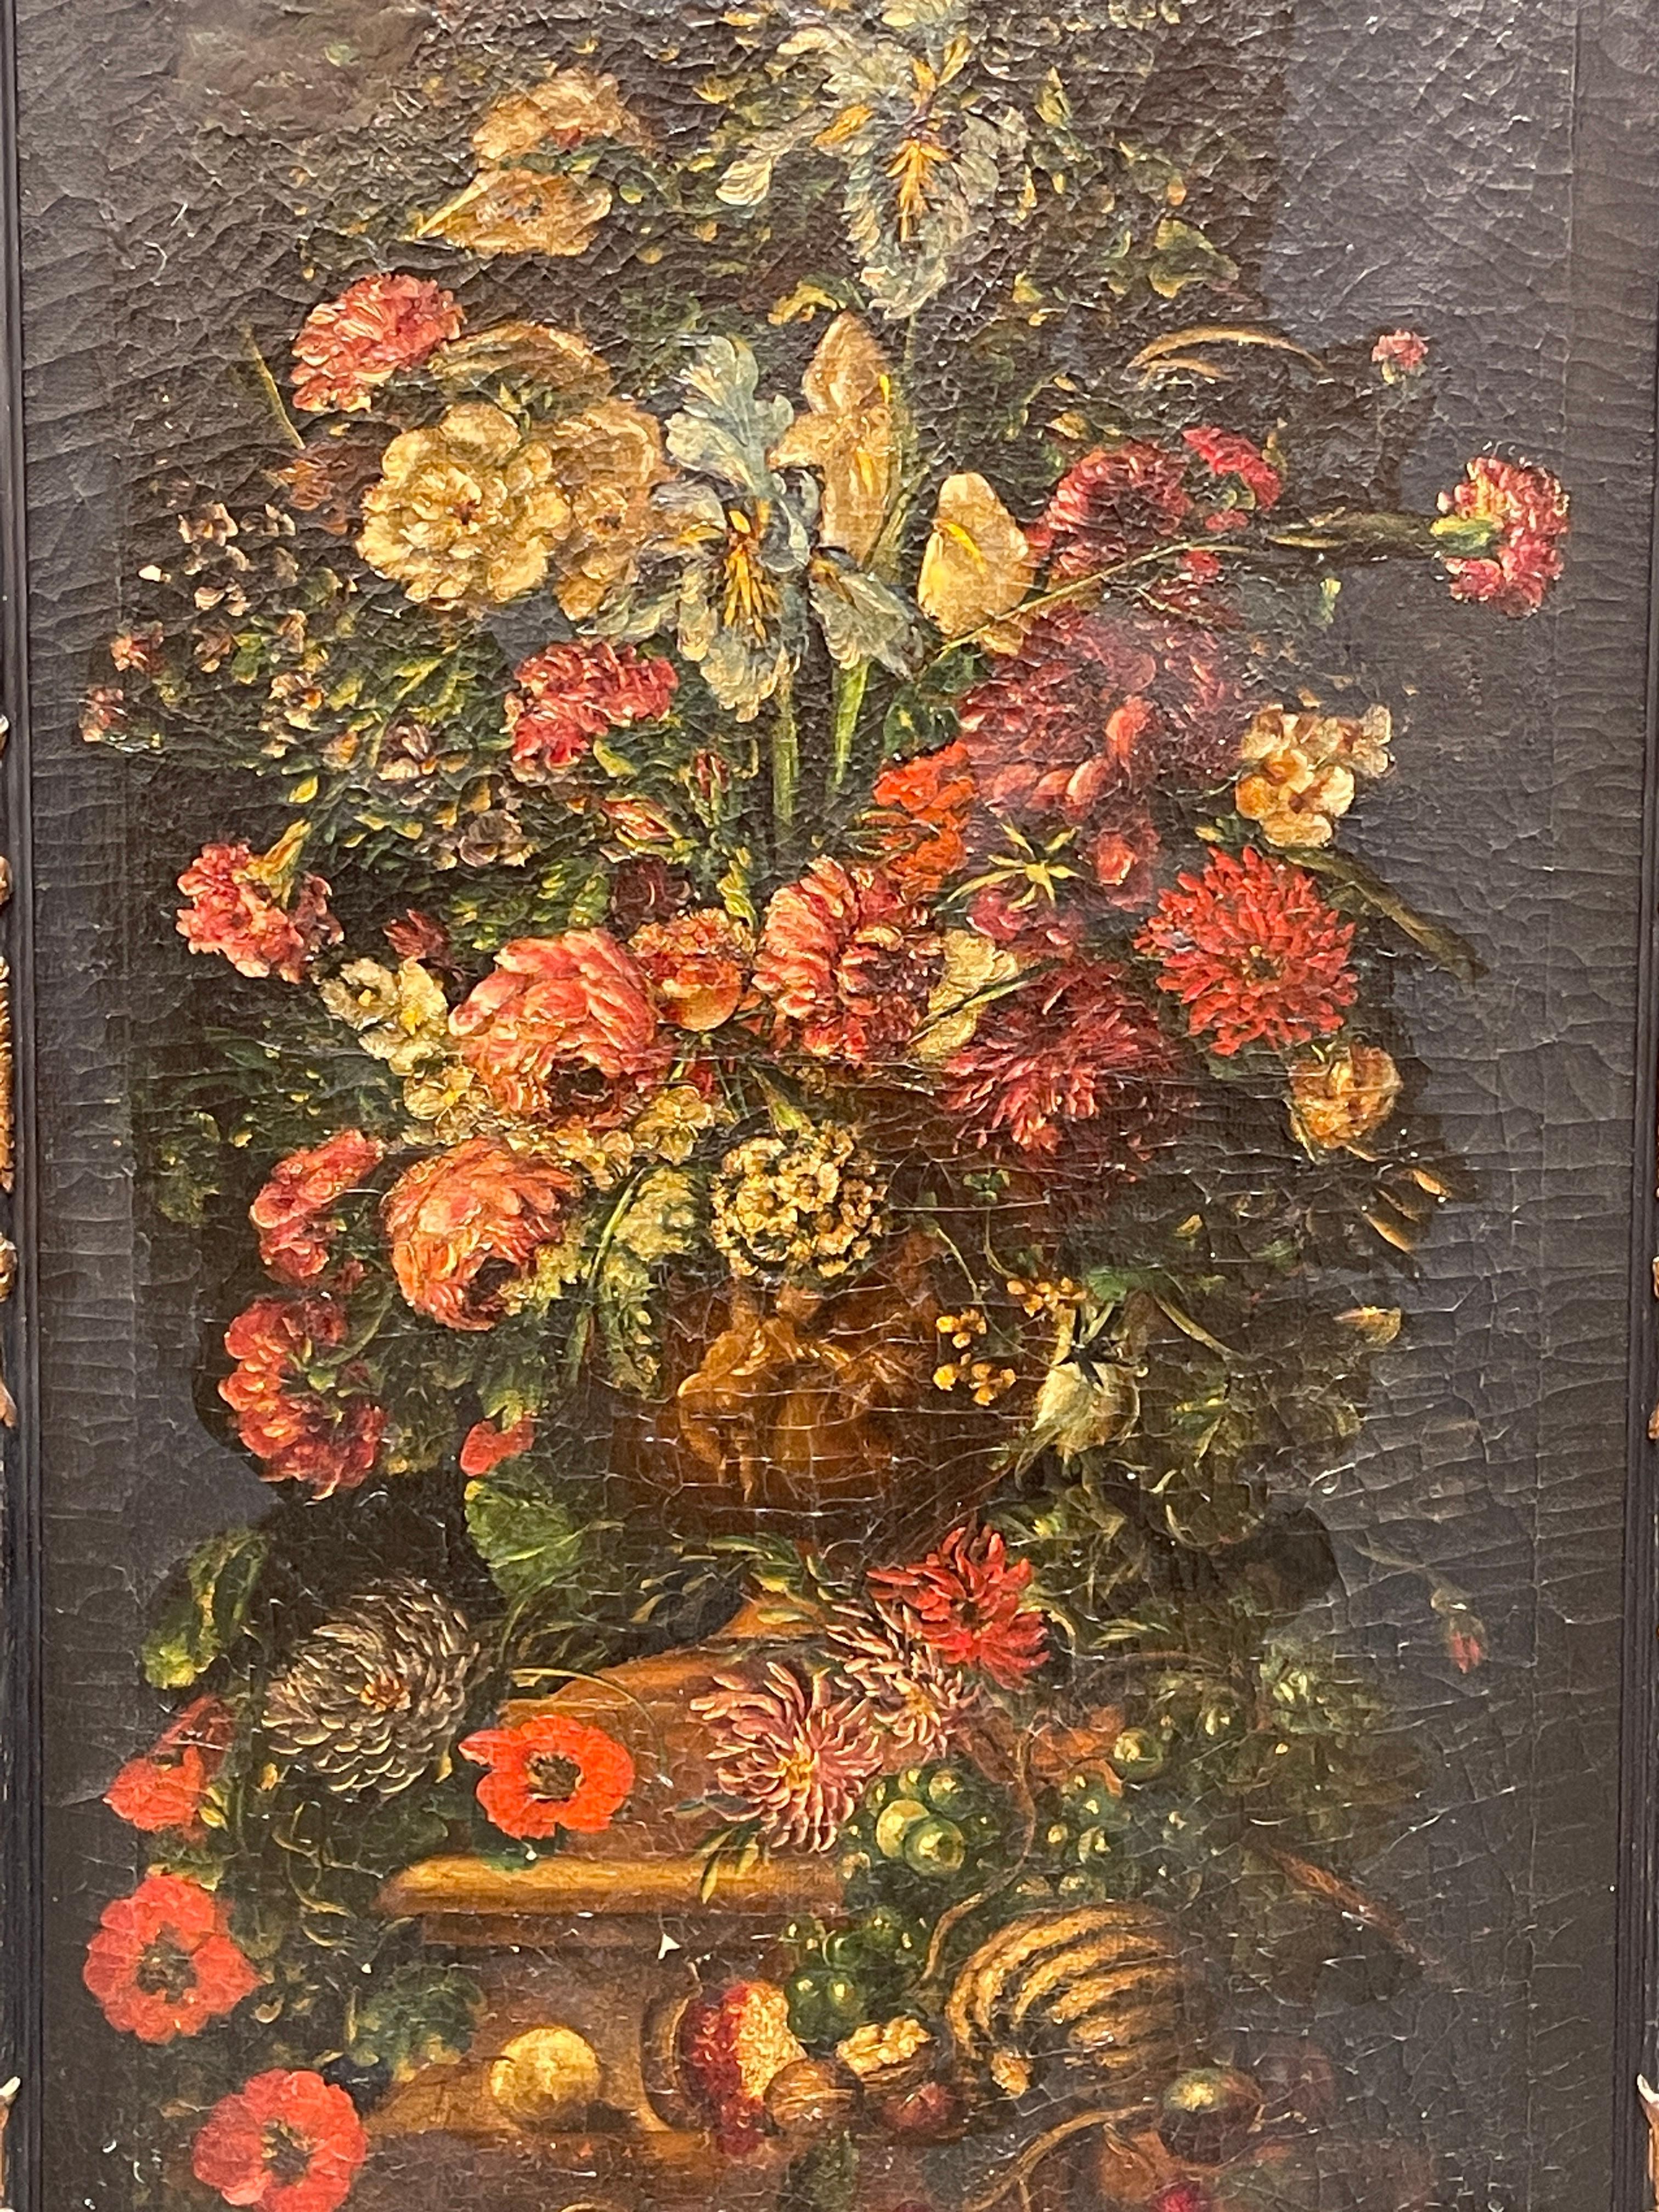 Antique painting, Flemish, flowers, Banks after Van Huysum
Oil painting on canvas, from the 18th century, depicting a refined floral composition, made by a follower of Van Huysum, Banks.
Canvas in good condition, as shown in the photos.
Coeval